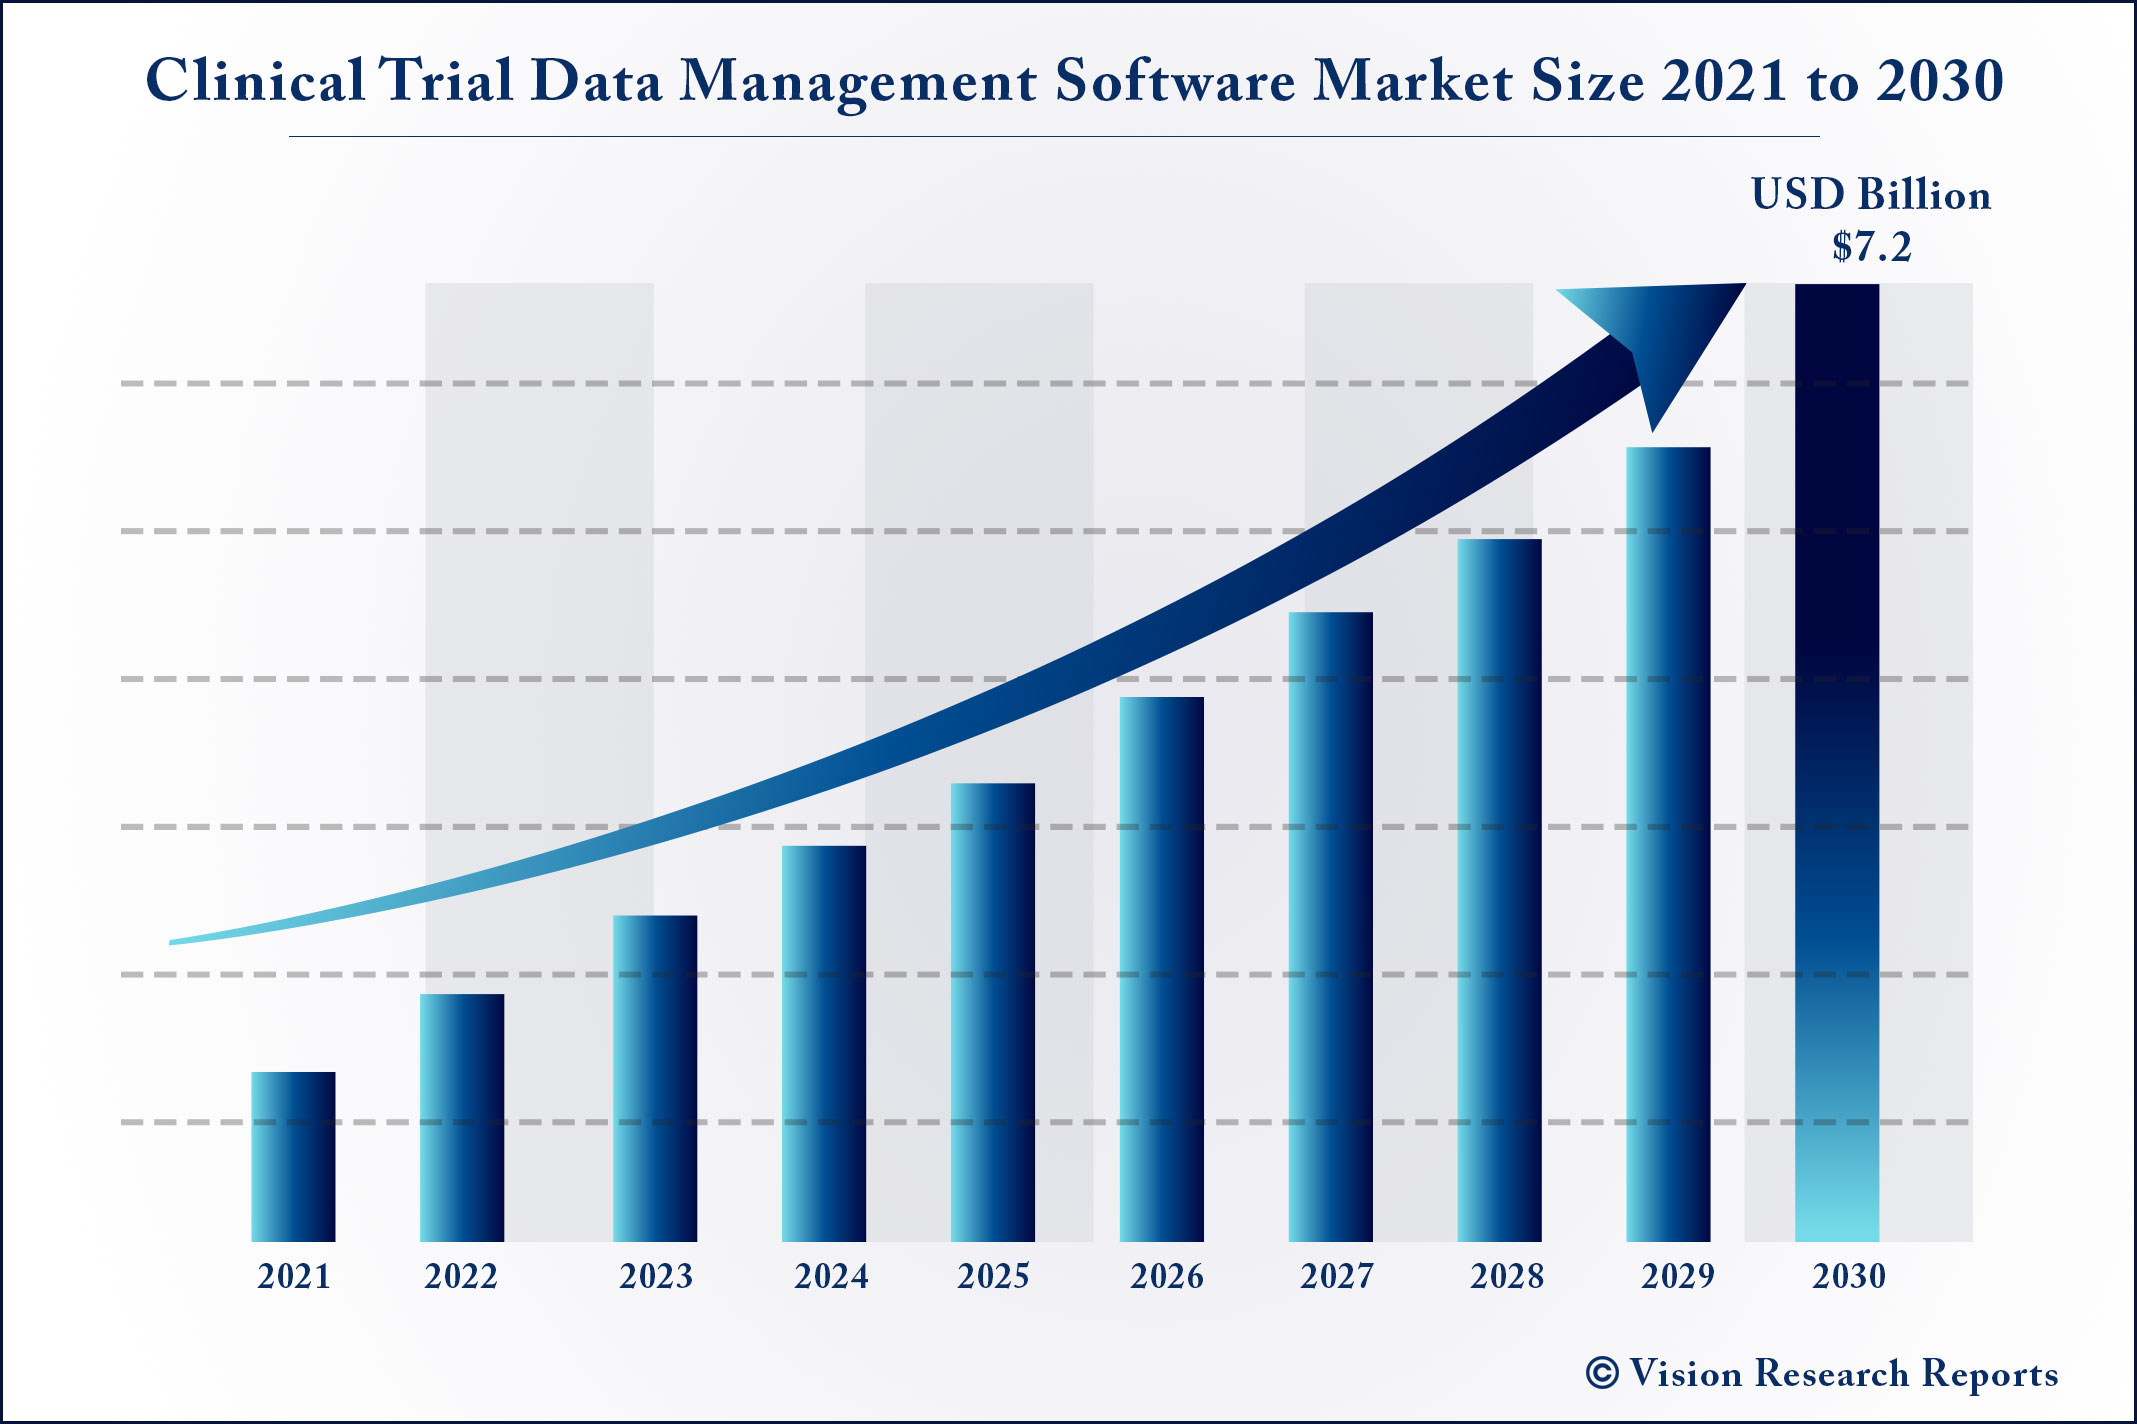 Clinical Trial Data Management Software Market Size 2021 to 2030